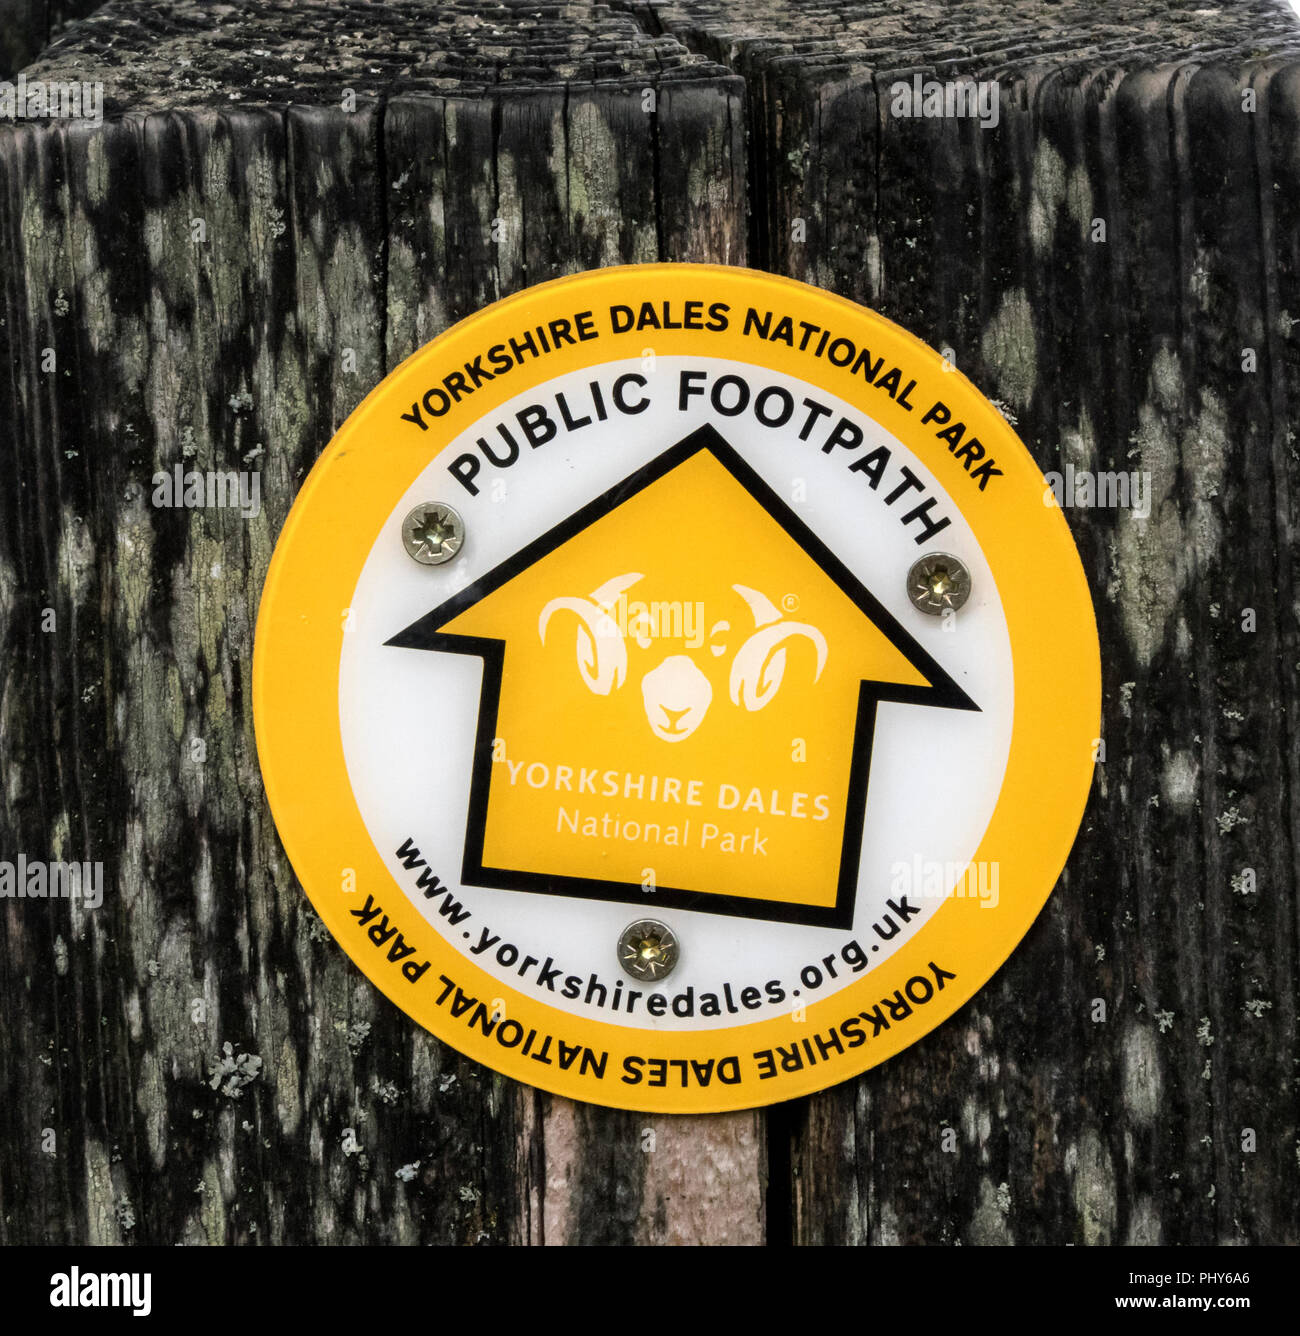 Public Footpath sign, Yorkshire Dales National Park. Stock Photo